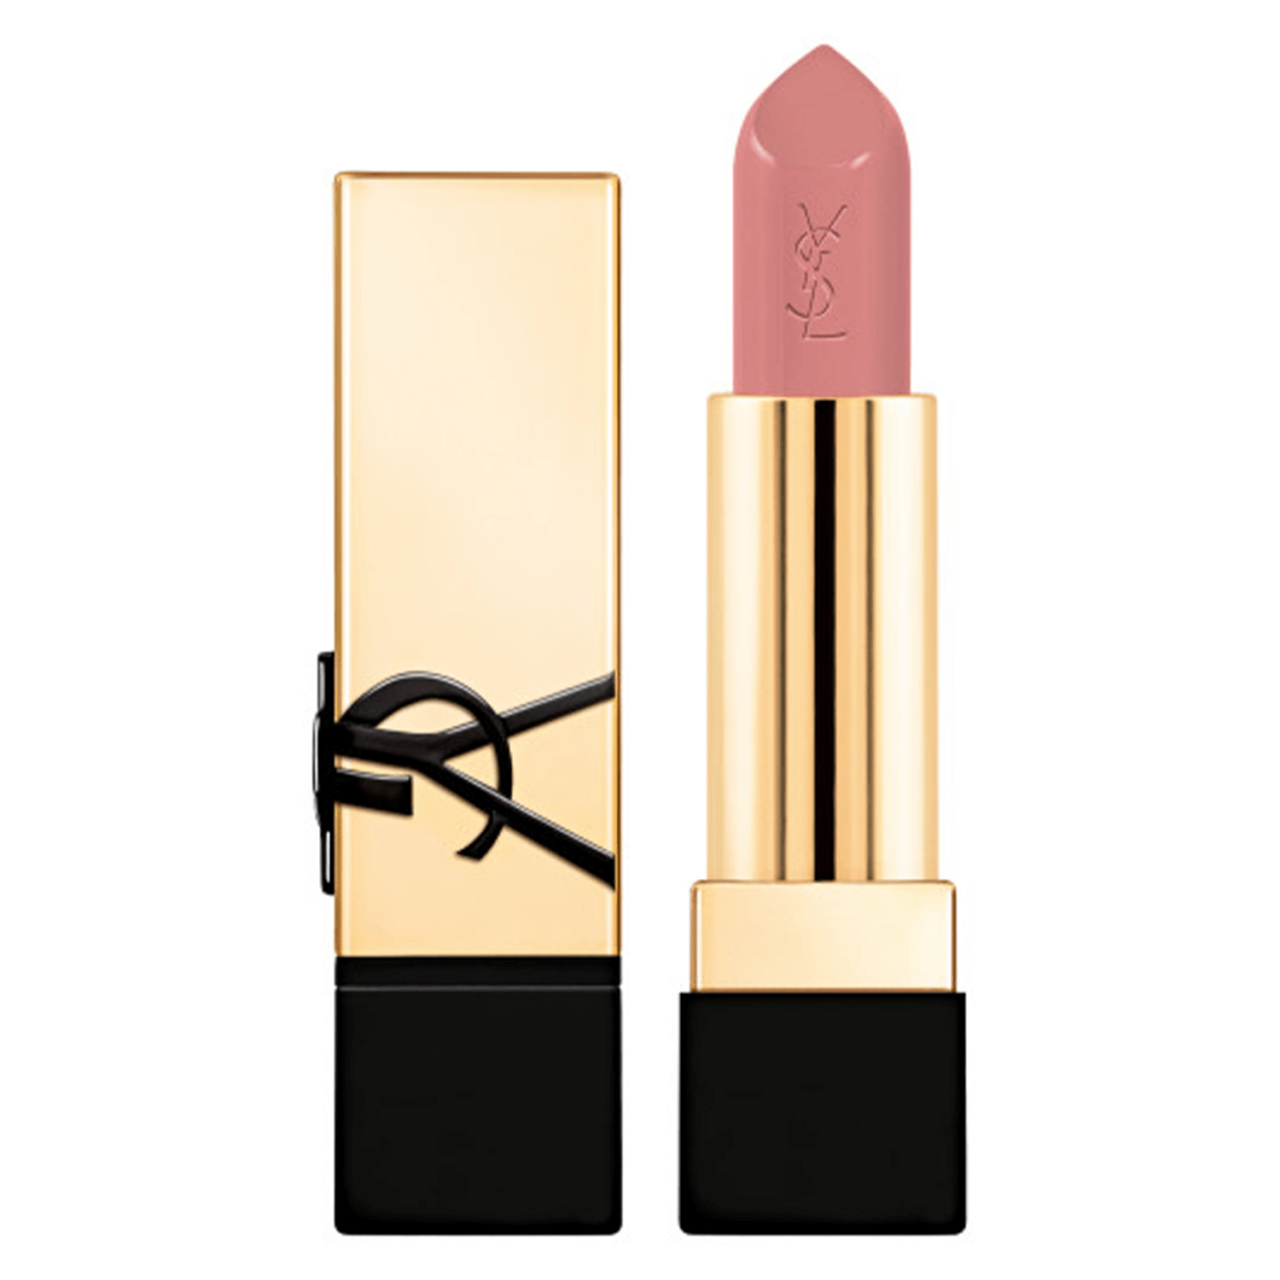 Rouge Pur Couture - Caring Satin Lipstick N5 Tribute Nude von Yves Saint Laurent